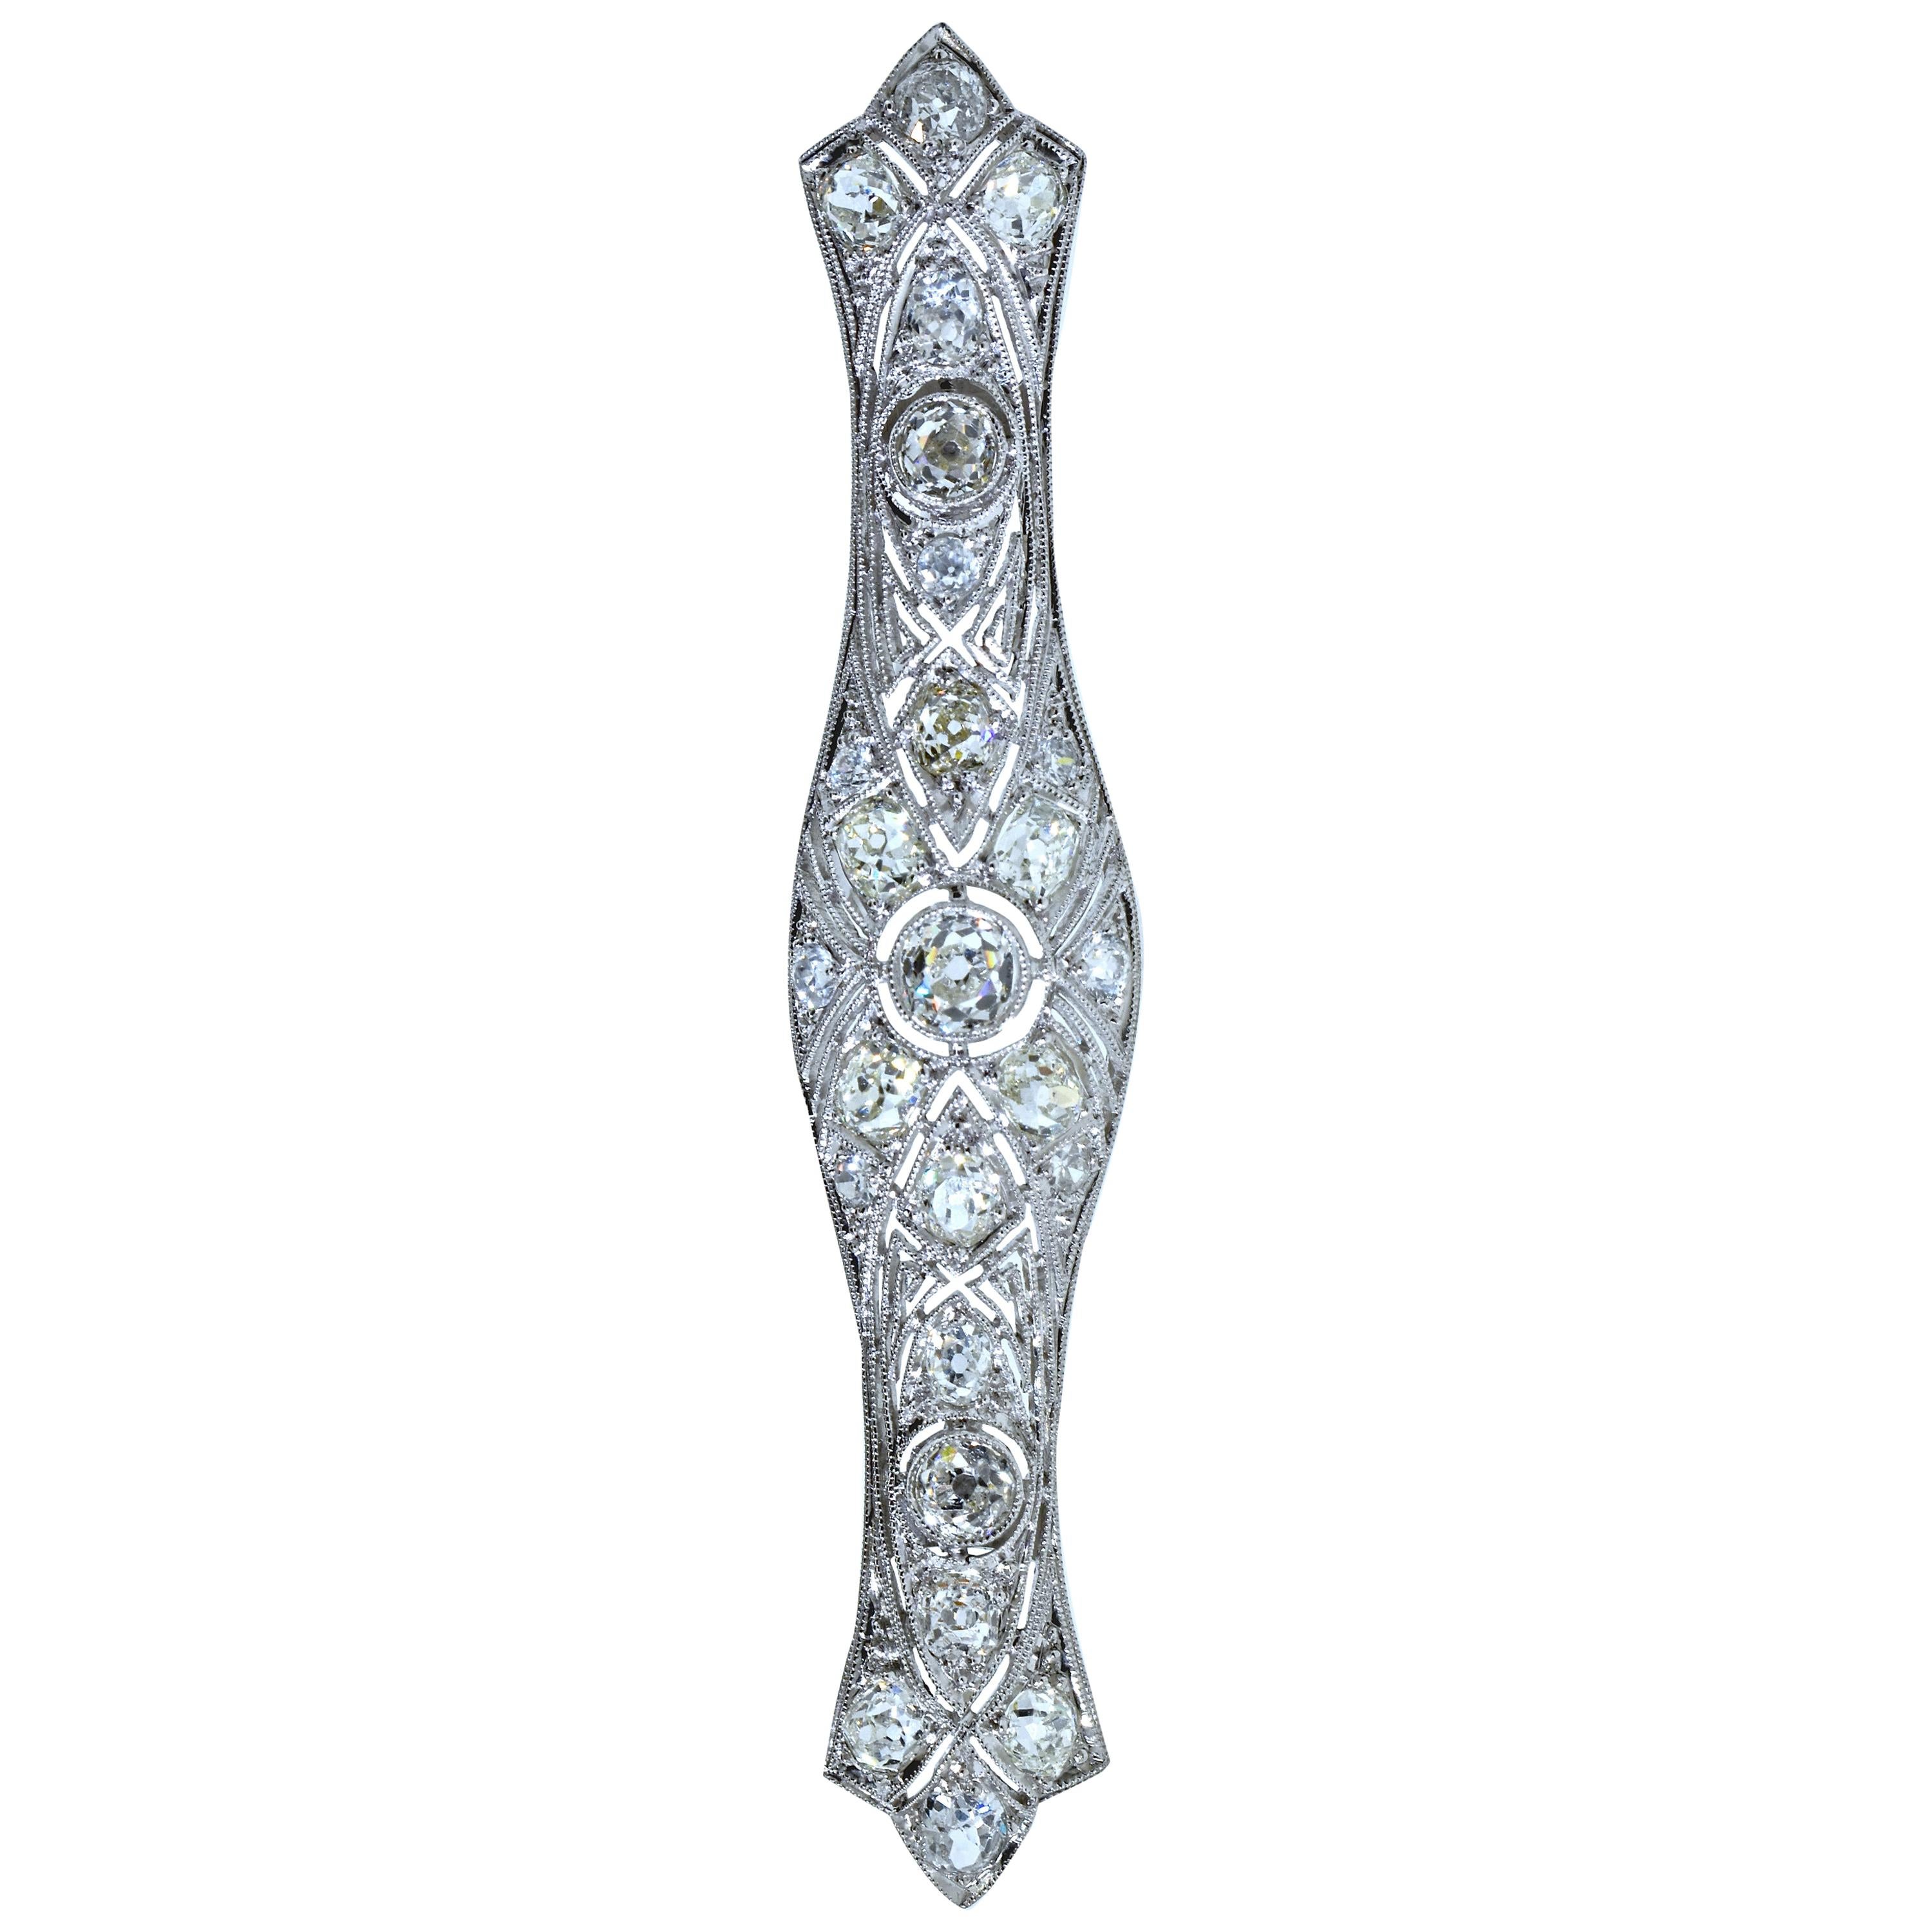 Antique brooch in platinum with fine diamonds.  This is a very large example of this type of an iconic Edwardian piece.  It possesses approximately 4.5 cts of European cut diamonds, all well matched and near colorless (I), and very slightly